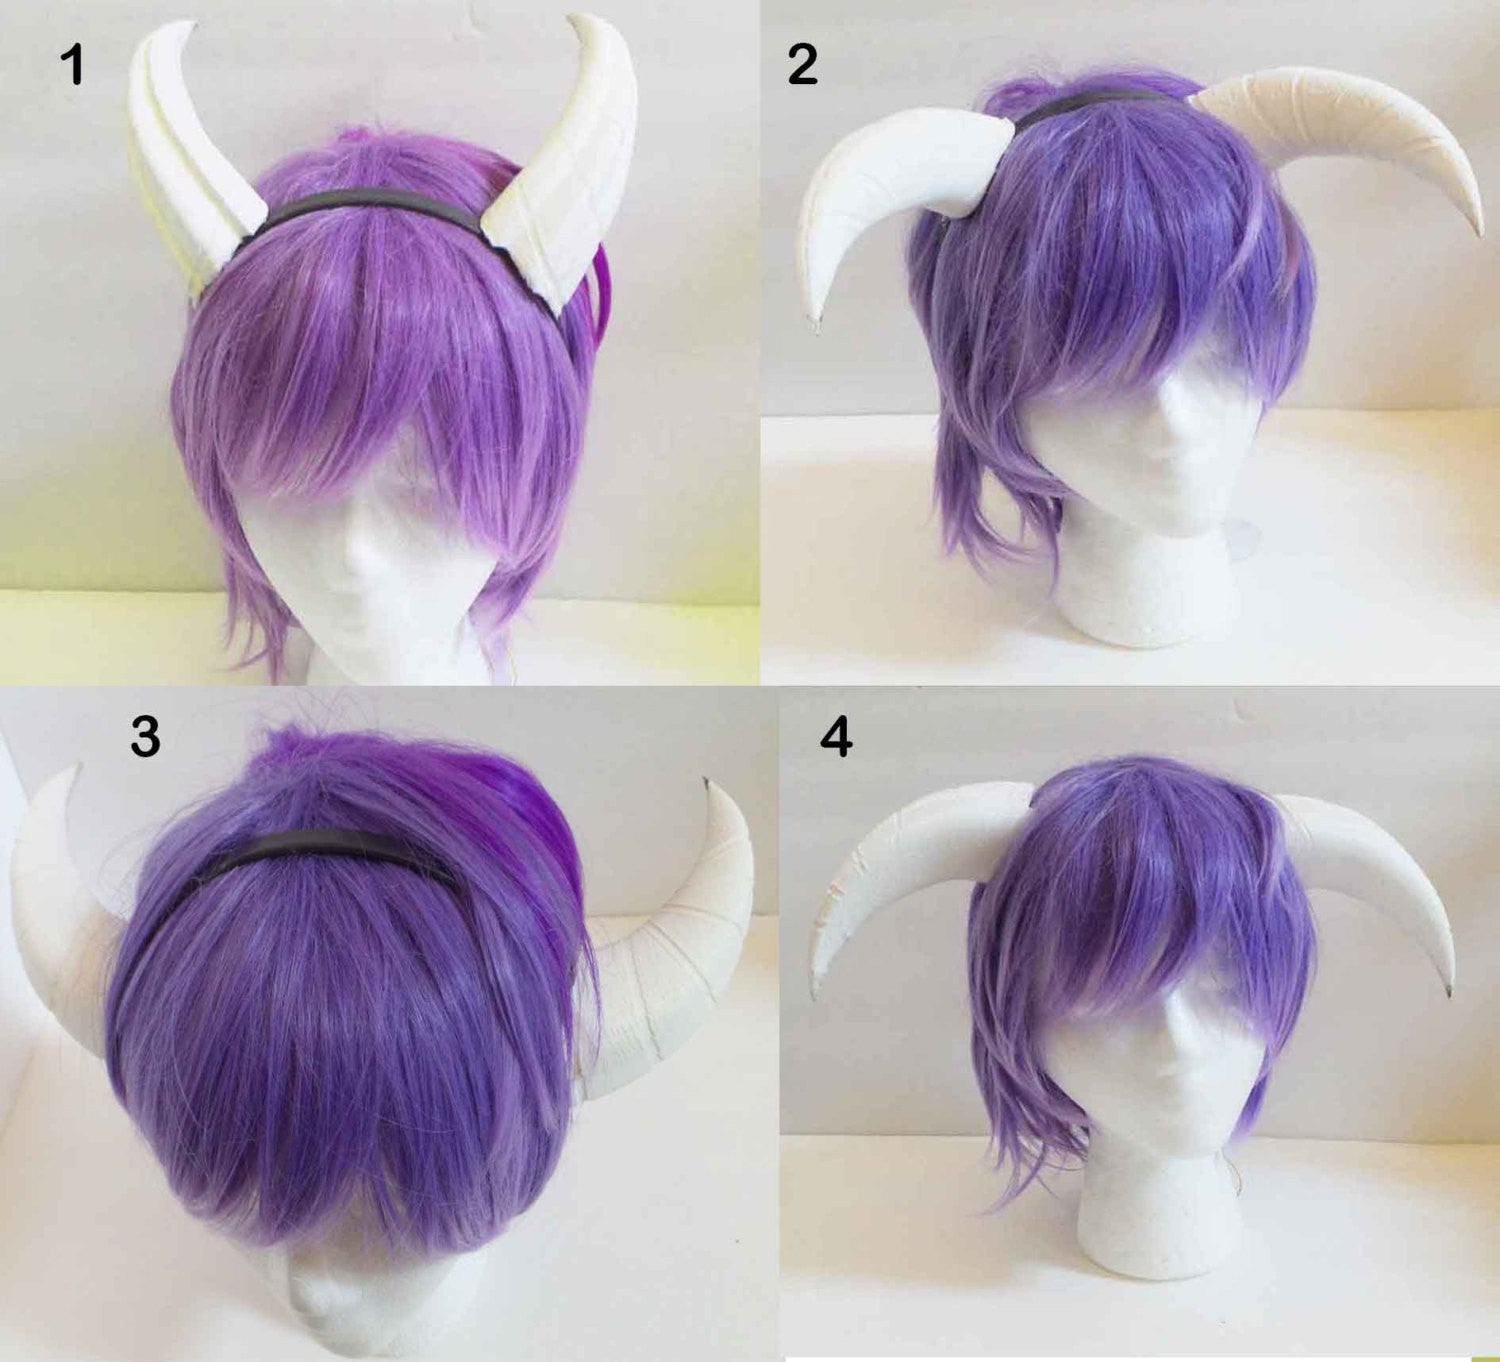 Goat fantasy 3d printed horns many multi mounting and color options horns on headband black white gray - Mud And Majesty